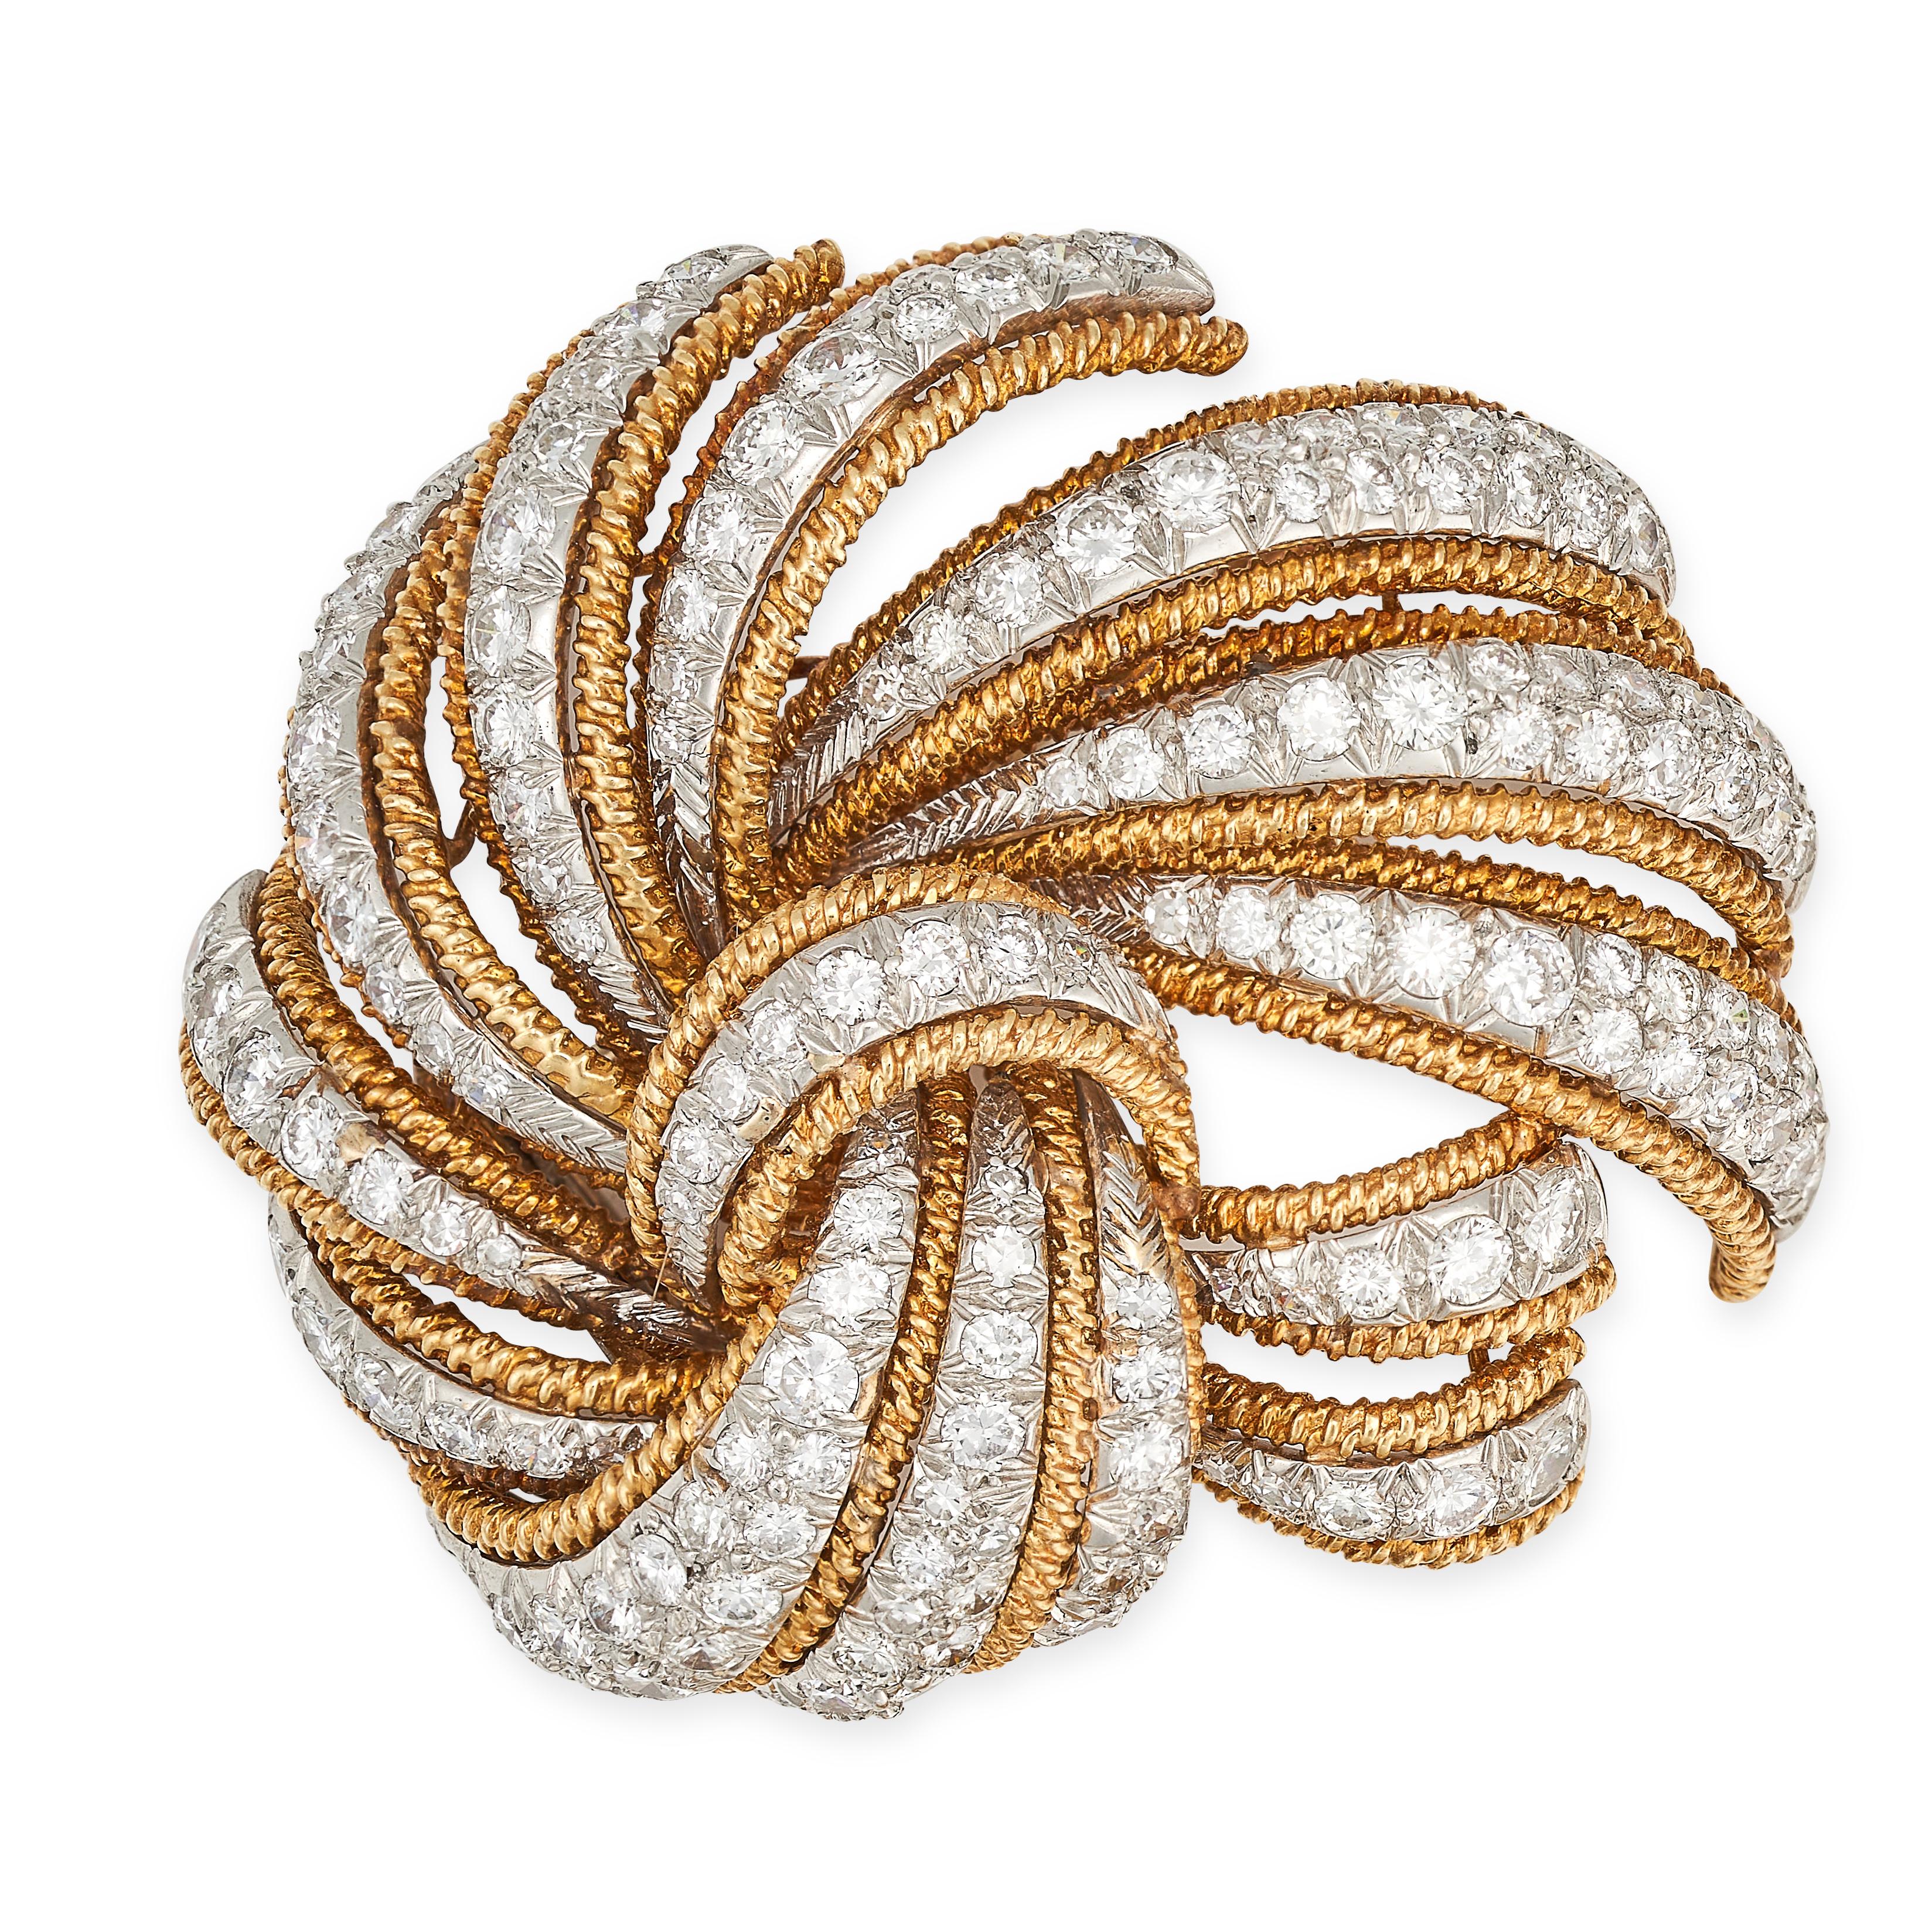 DAVID WEBB, A VINTAGE DIAMOND BROOCH in yellow gold and platinum, the scrolling body set with rows